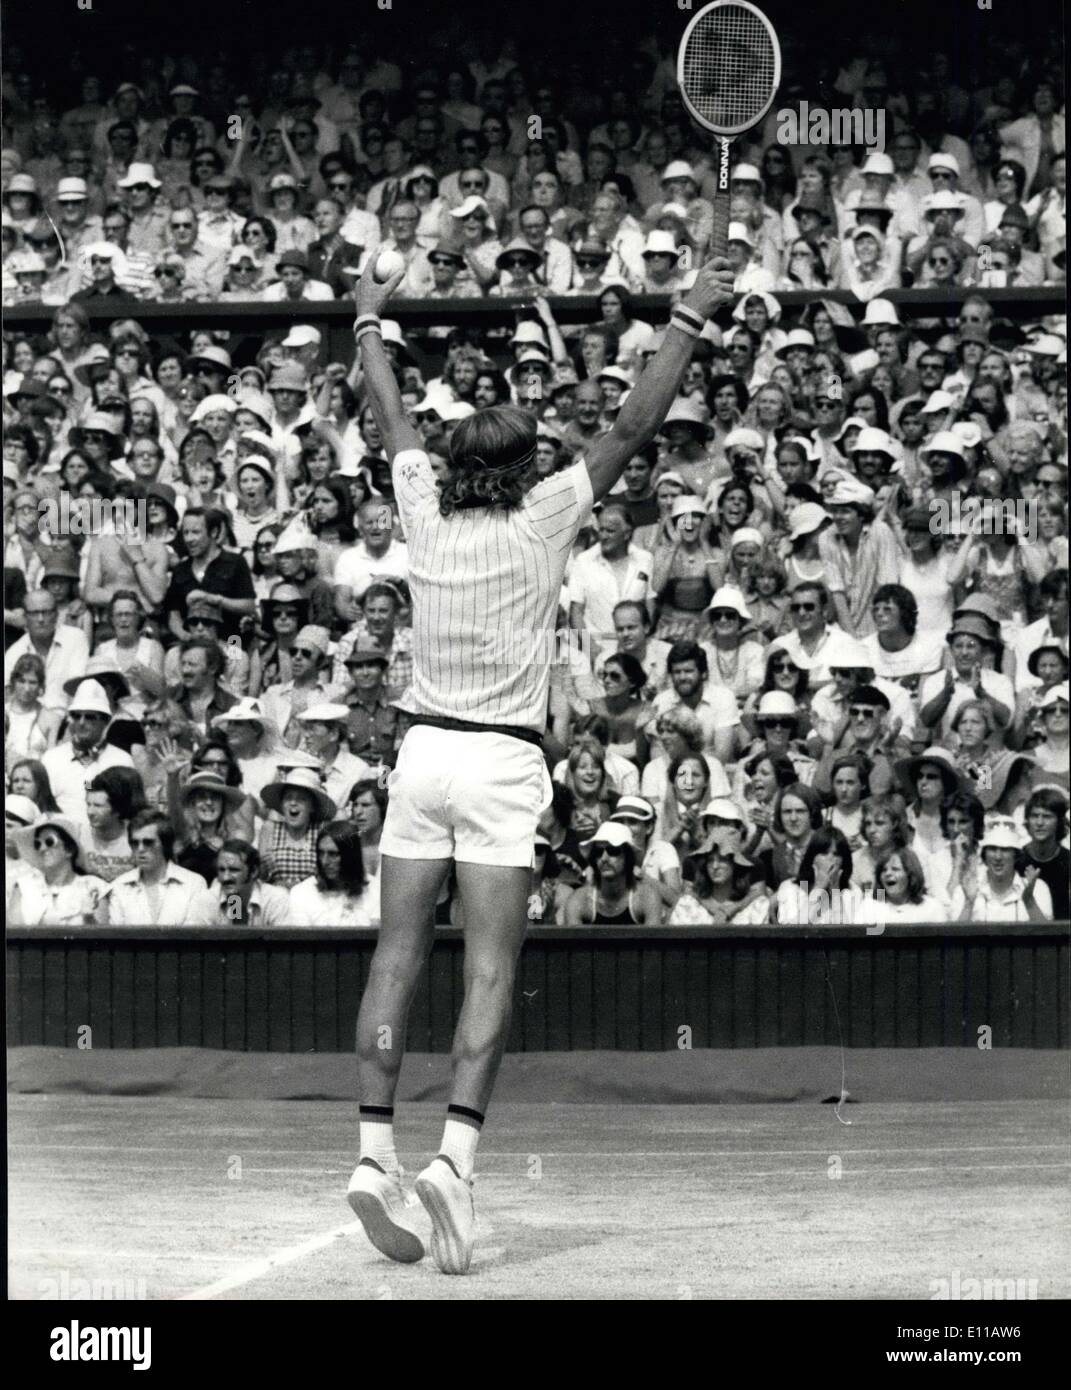 Jul. 03, 1976 - Bjorn Borg of Sweden is the 1976 Wimbledon singles champion: This afternoon on the centre court at Wimbledon Bjorn Borg of Sweden won the Mens Singles title when beating L Nastase of Rumania 6-4 6-2 9-7. Photo shows Bjorn Borg hold his arms wide to the crowd after winning the final point in the men's singles final at Wimbledon today. Stock Photo